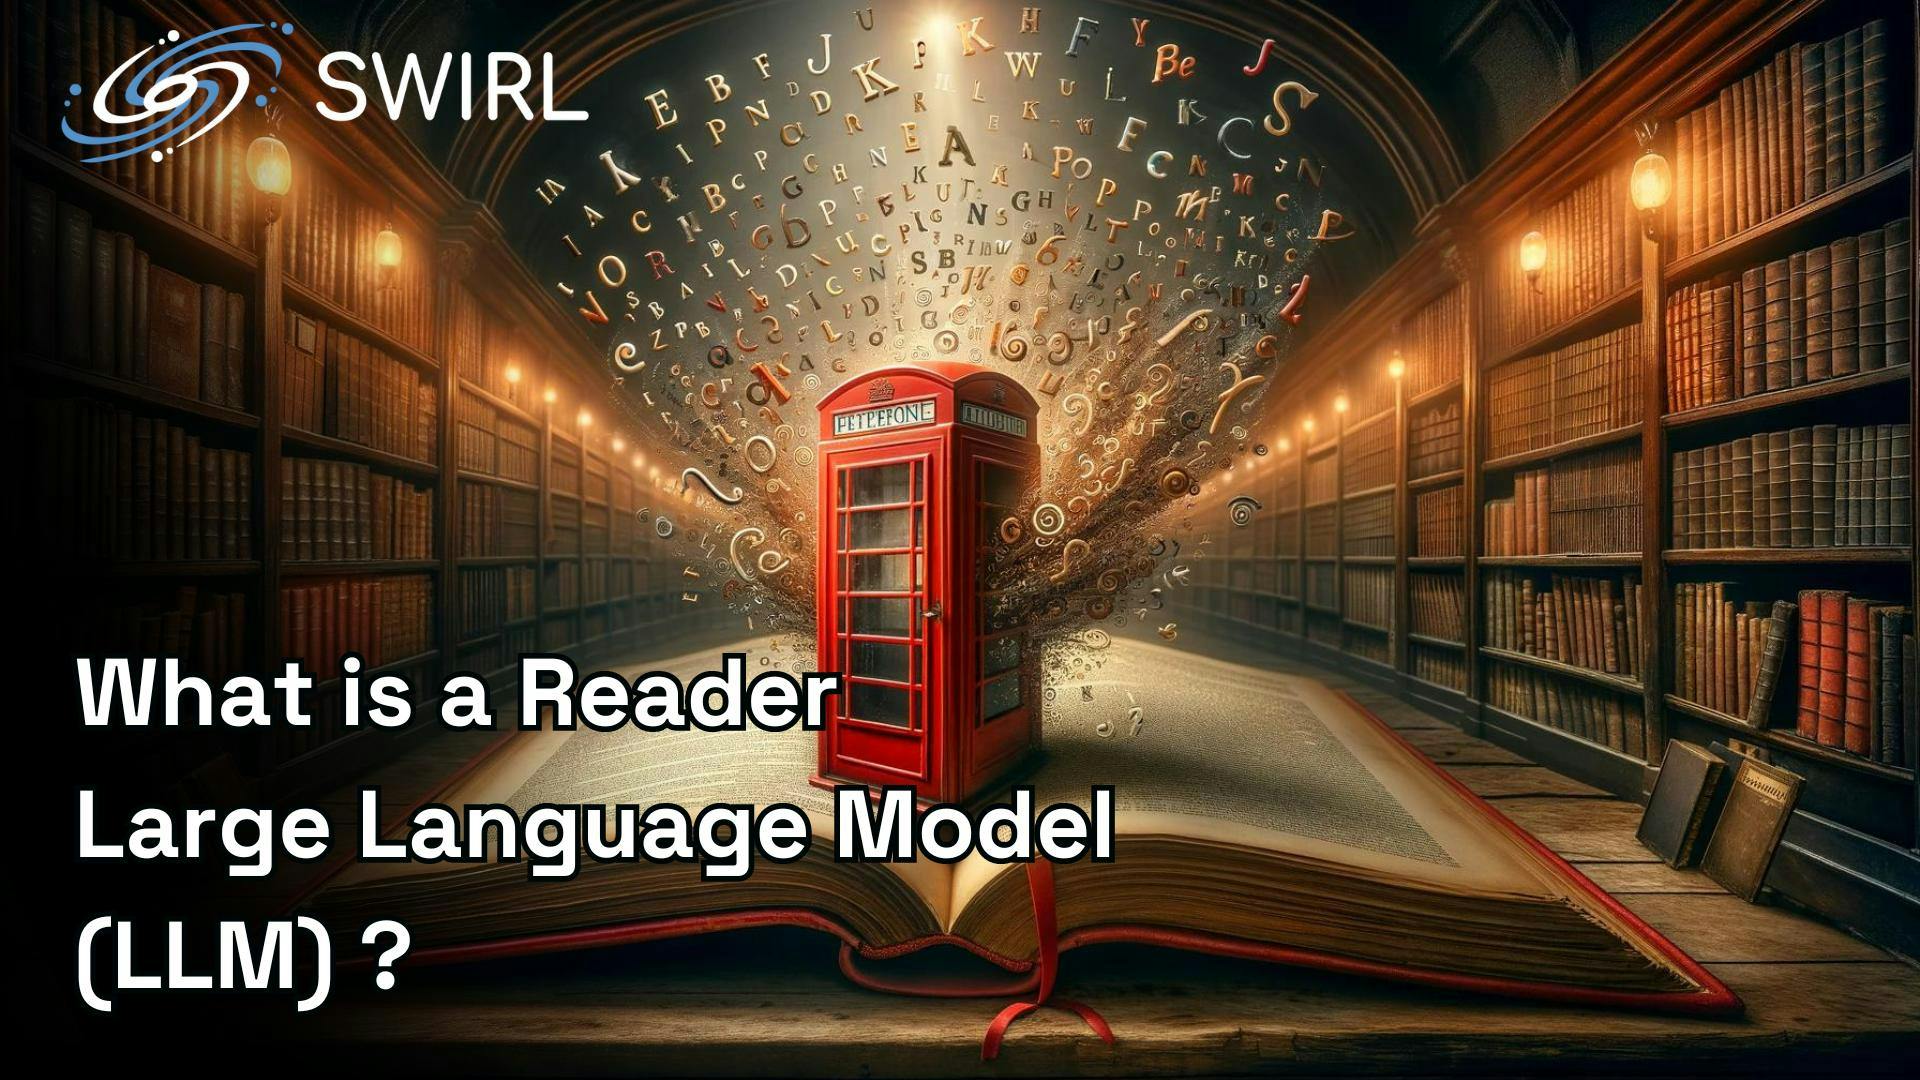 What is a Reader Large Language Model (LLM)?